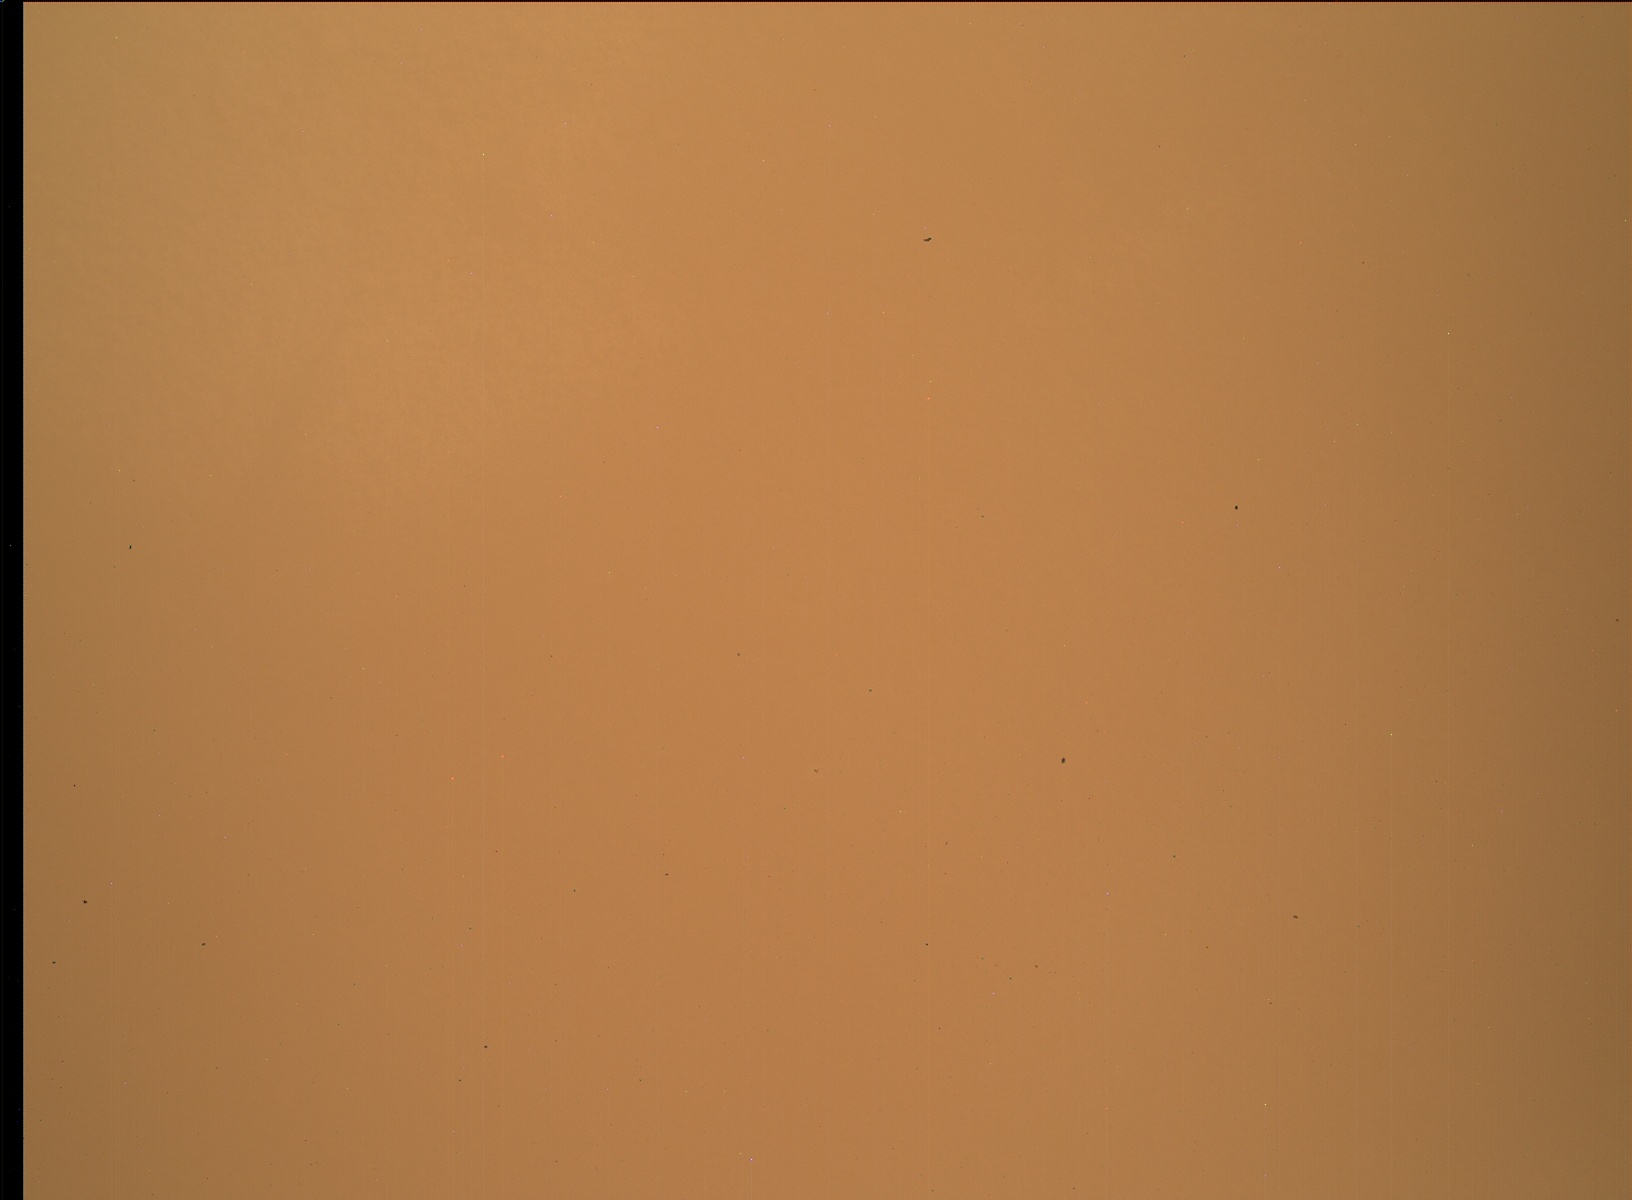 Nasa's Mars rover Curiosity acquired this image using its Mars Hand Lens Imager (MAHLI) on Sol 2890